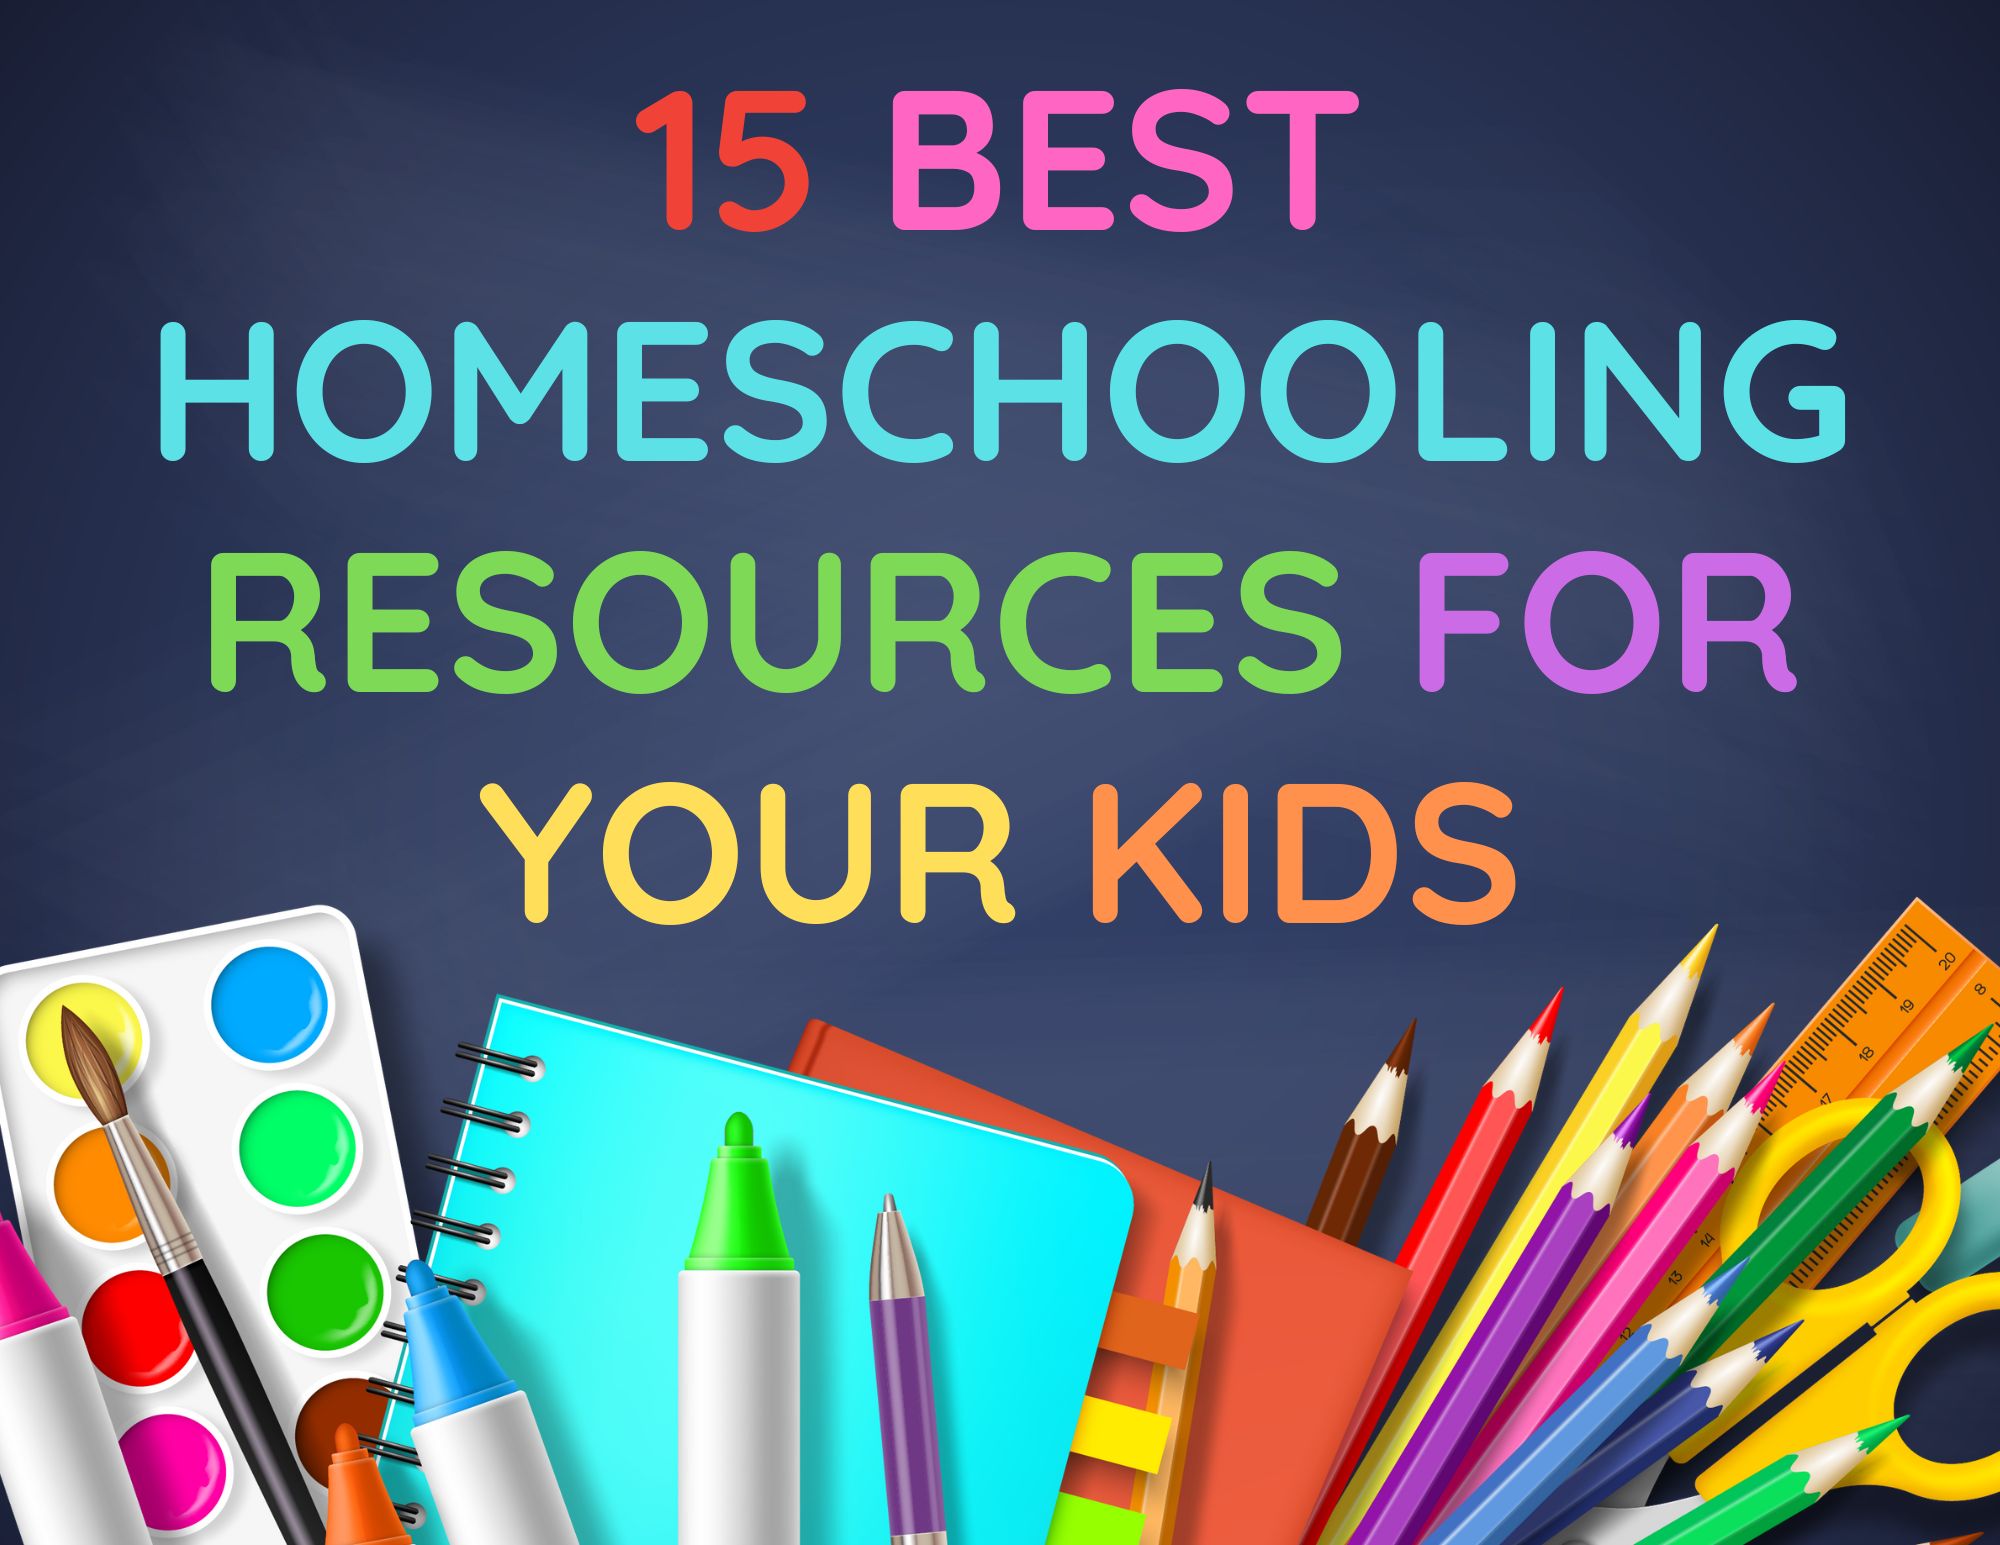 15 Best Homeschooling Resources For Your Kids